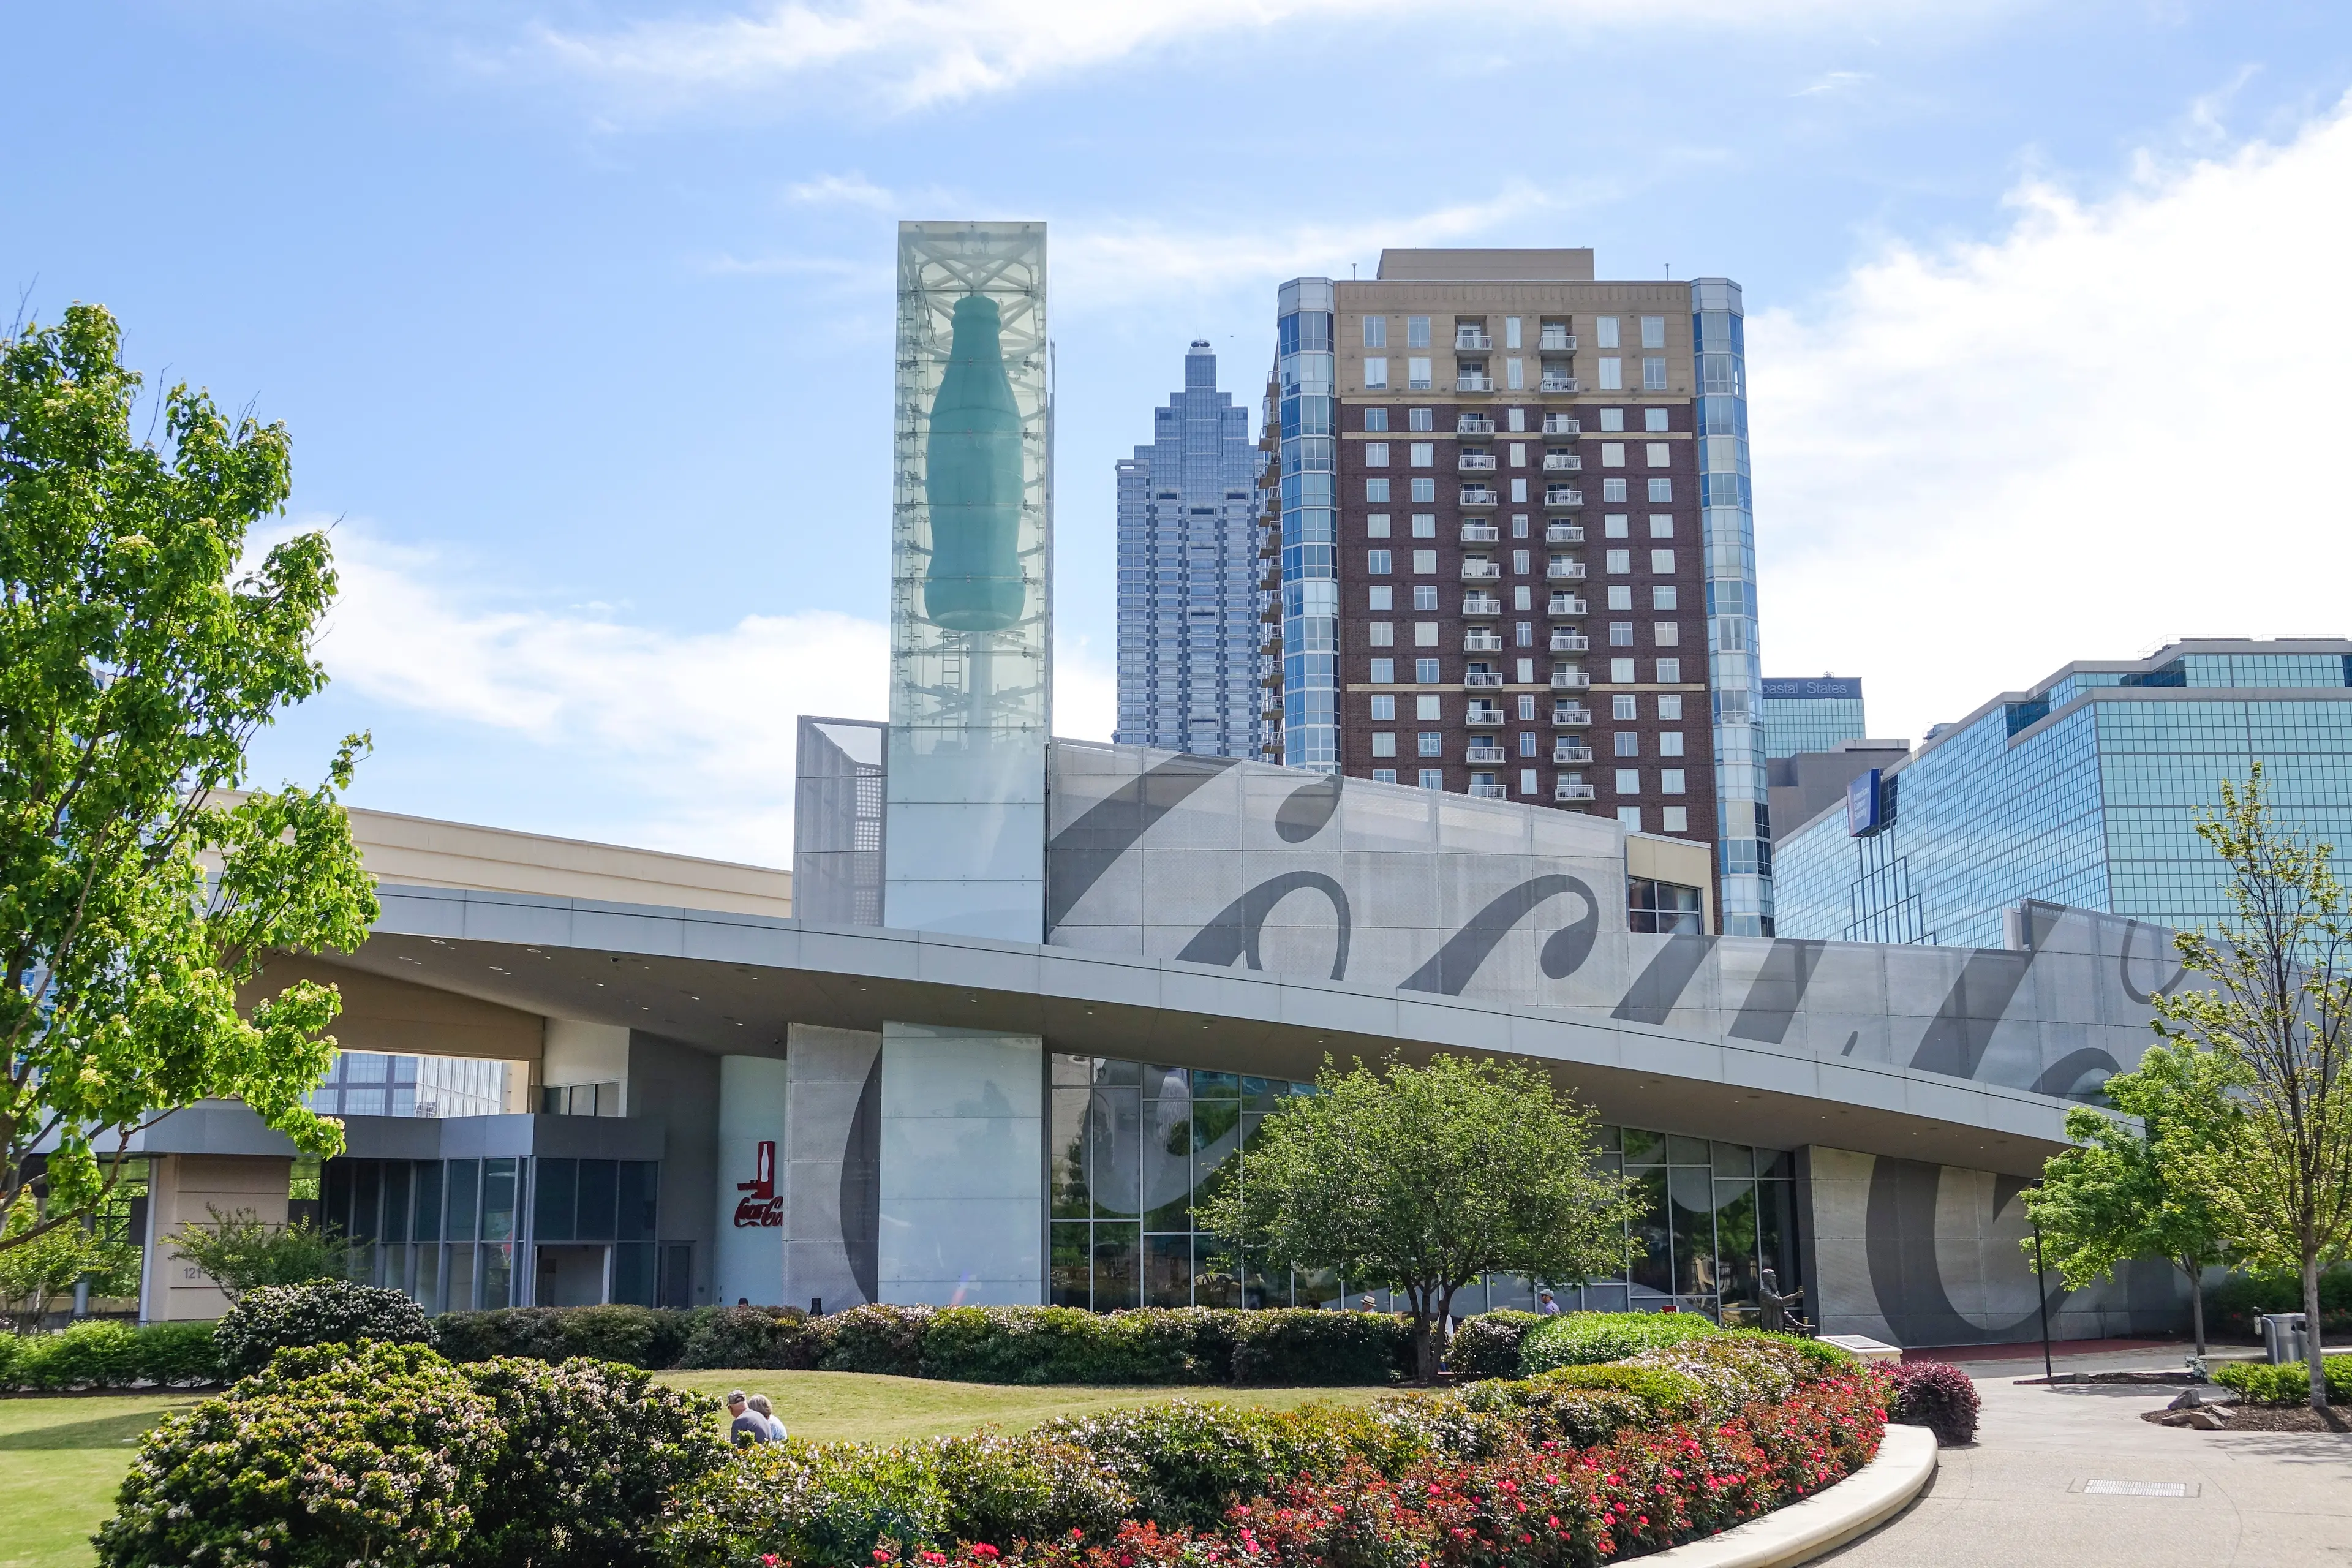 4-Day Atlanta Adventure: Nightlife and Outdoors with Friends